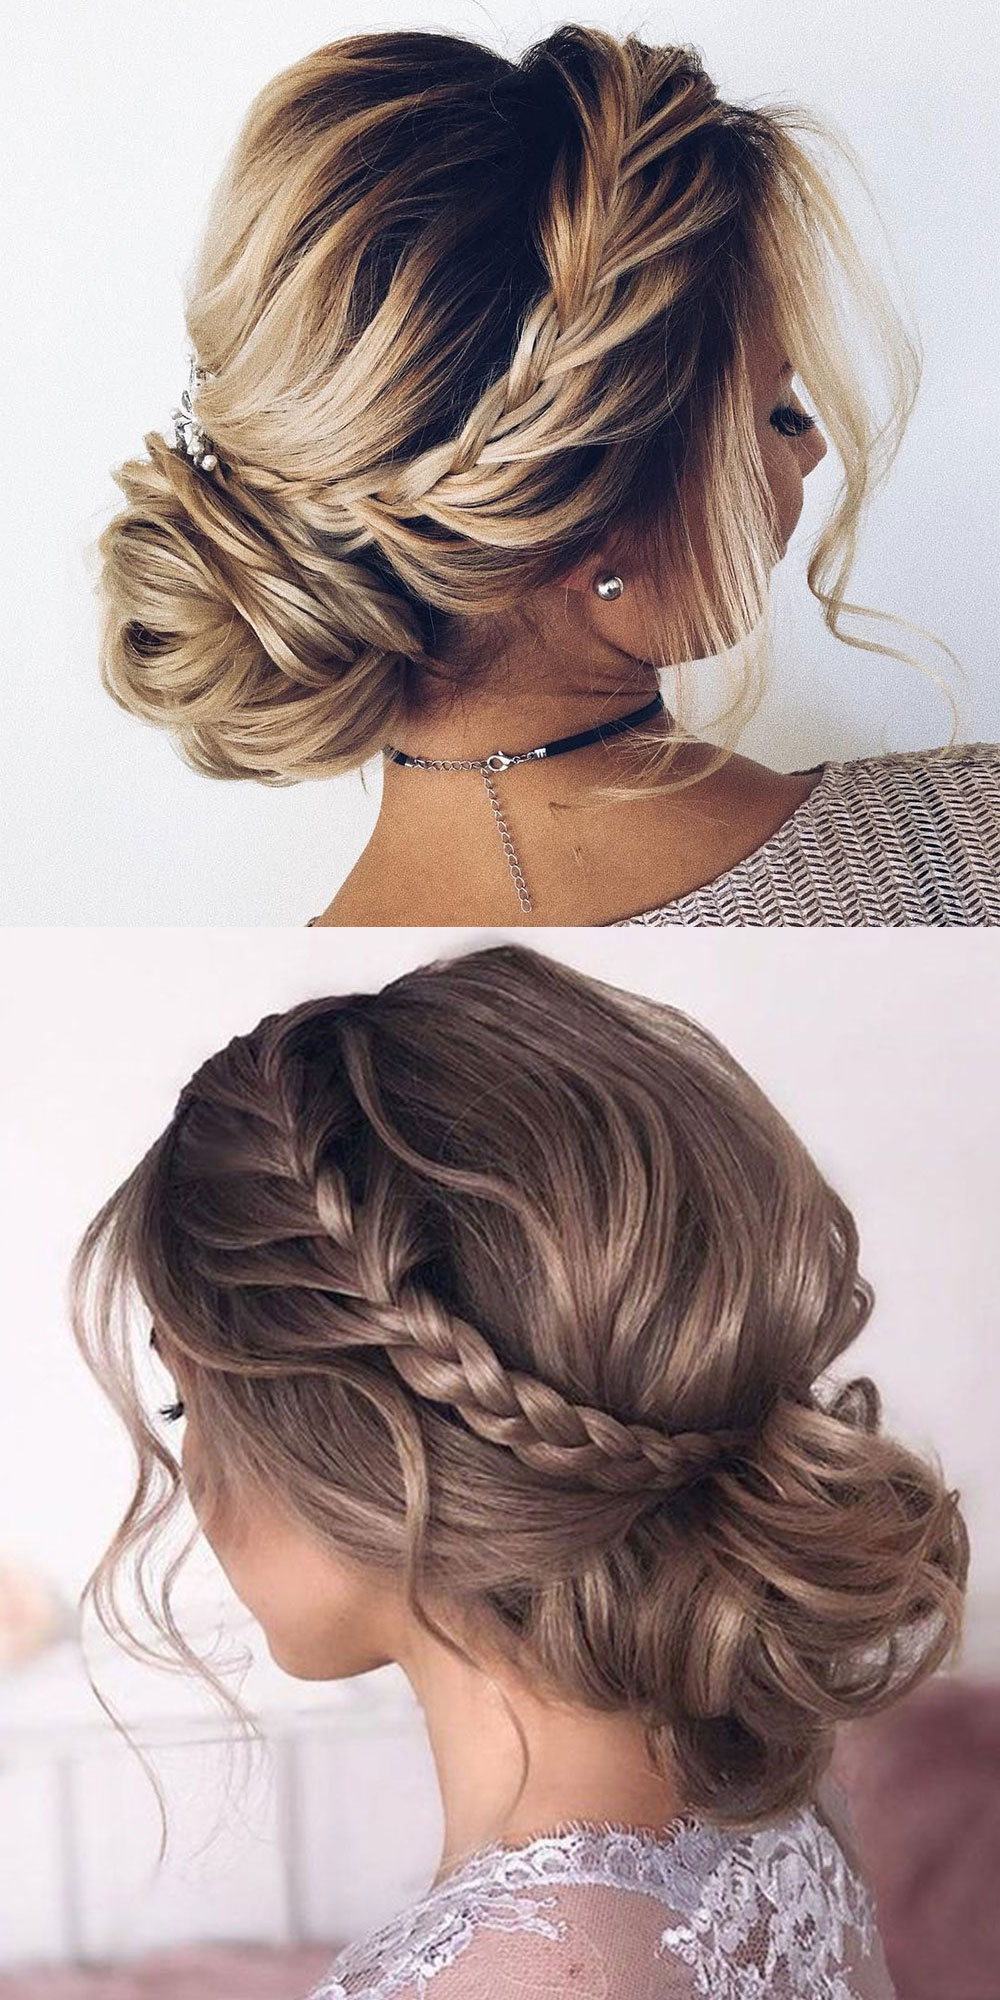 side braided and low bun weddng updo hairstyles